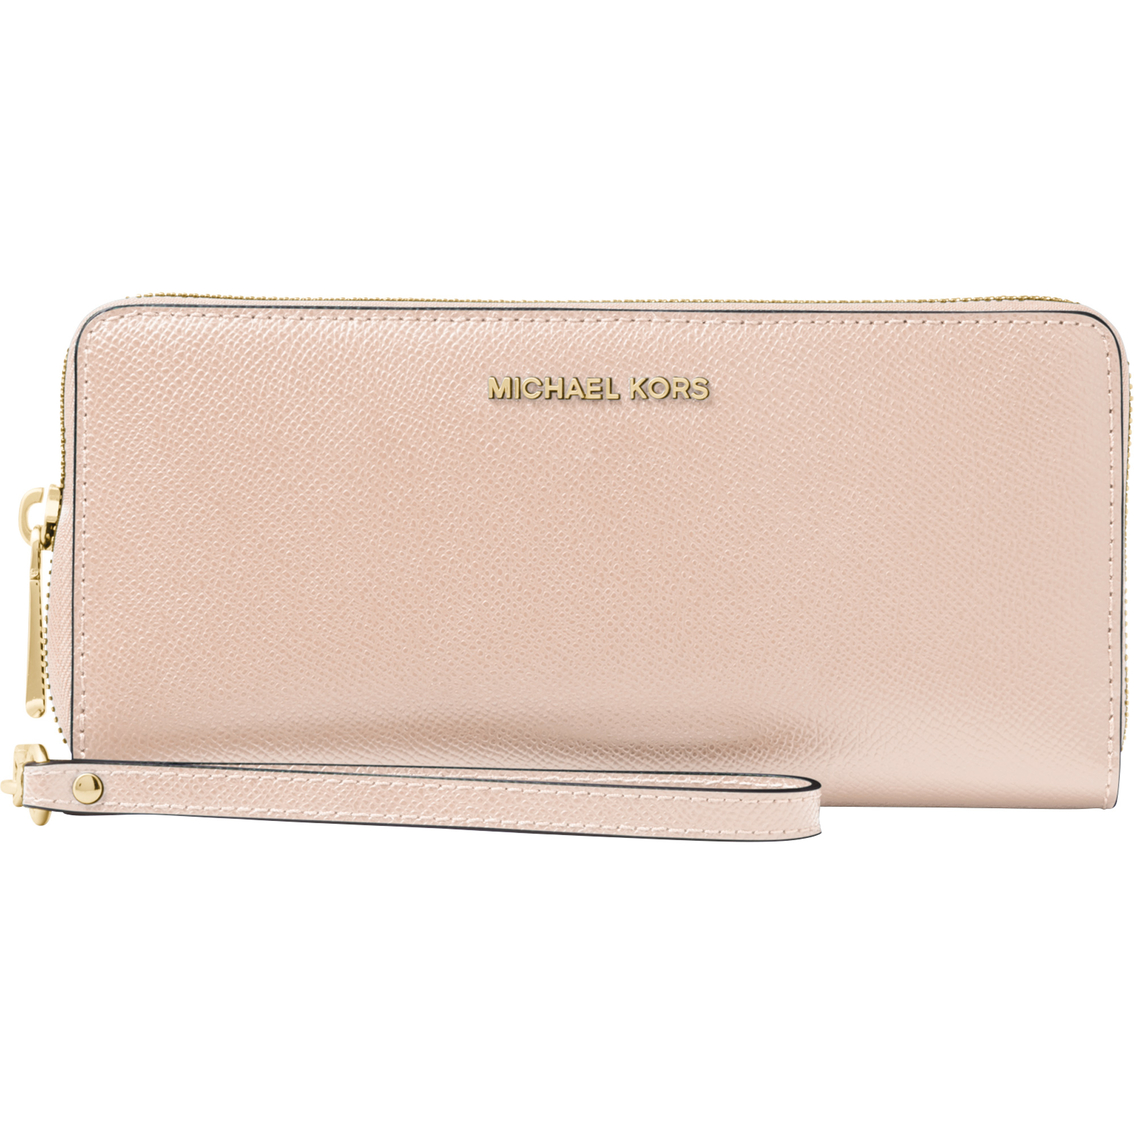 Michael Kors Travel Continental Wallet Leather | Wallets | Clothing ...